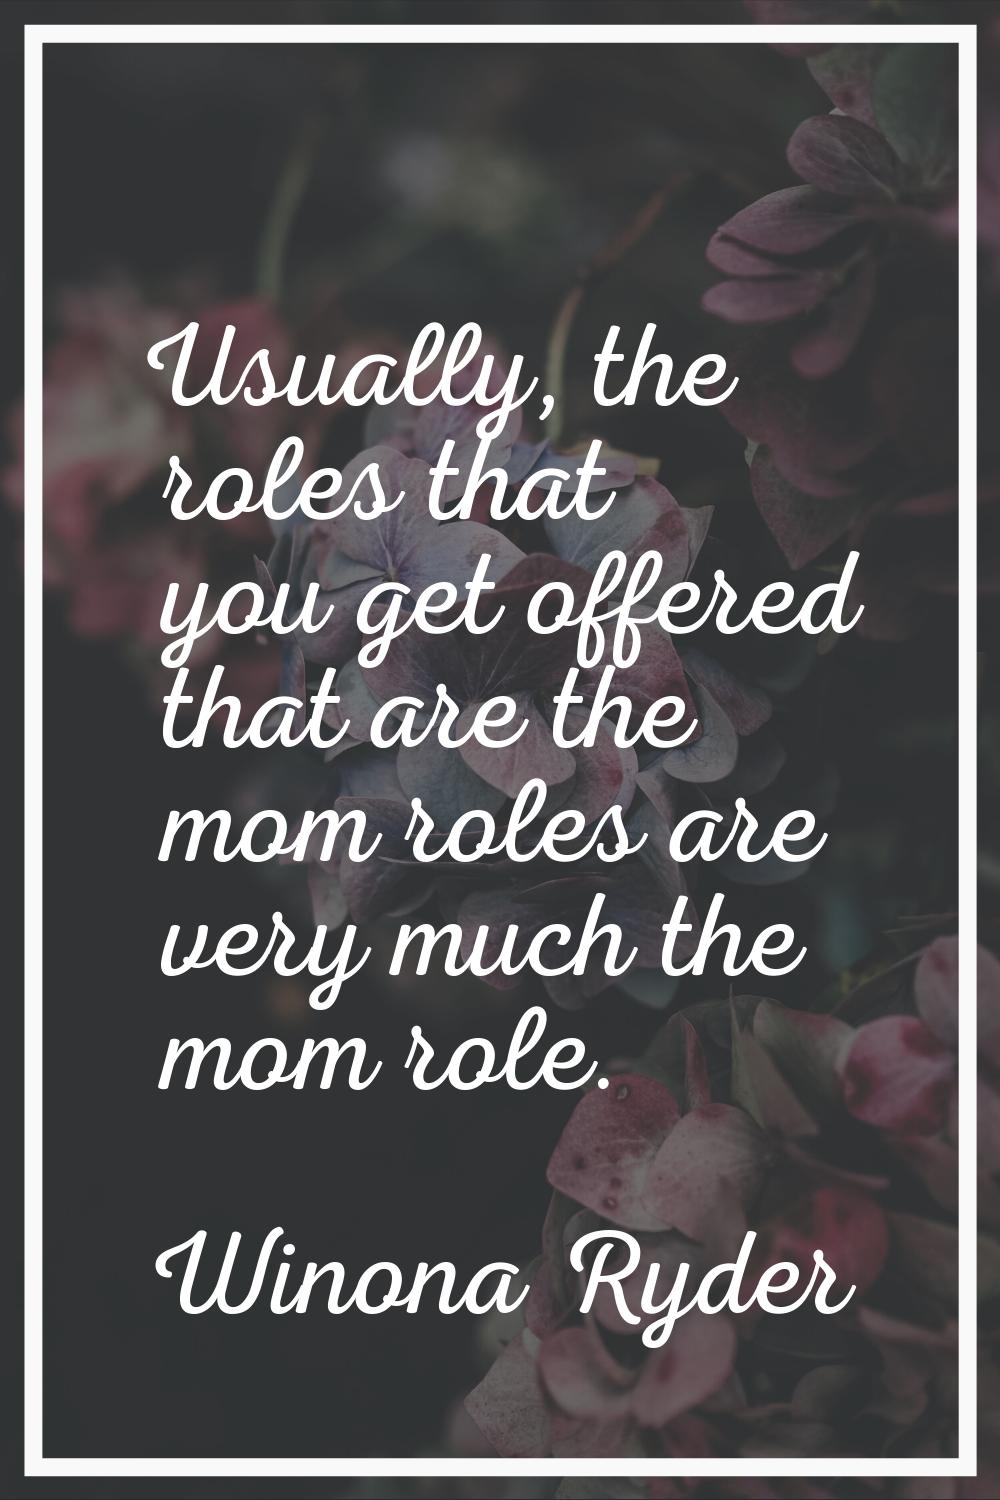 Usually, the roles that you get offered that are the mom roles are very much the mom role.